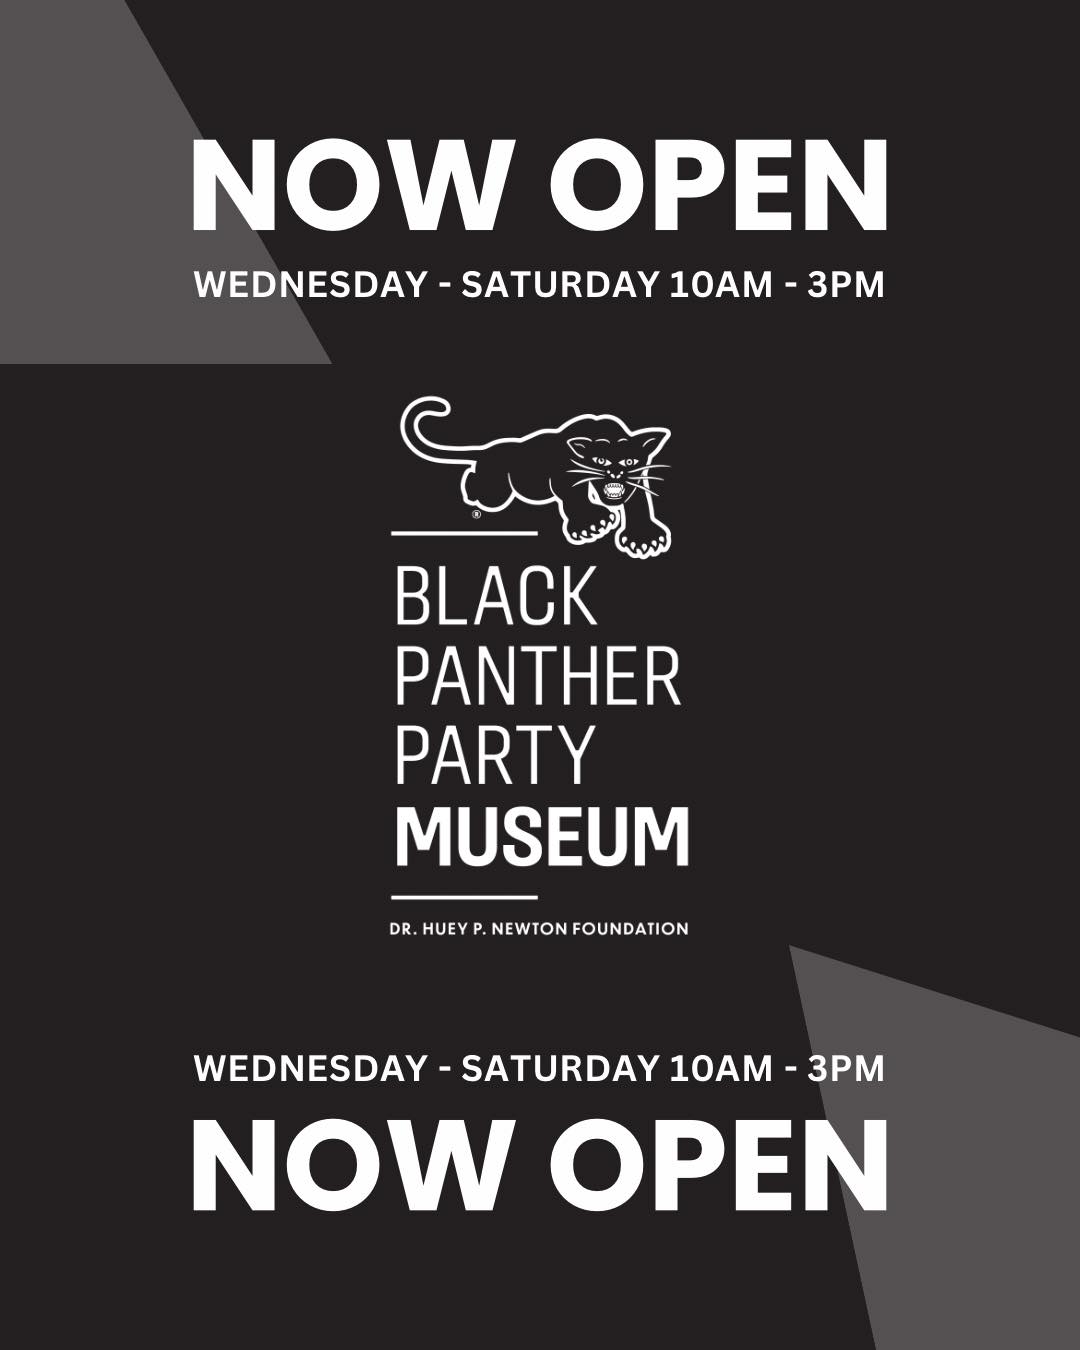 The Black Panther Party Museum is officially open!